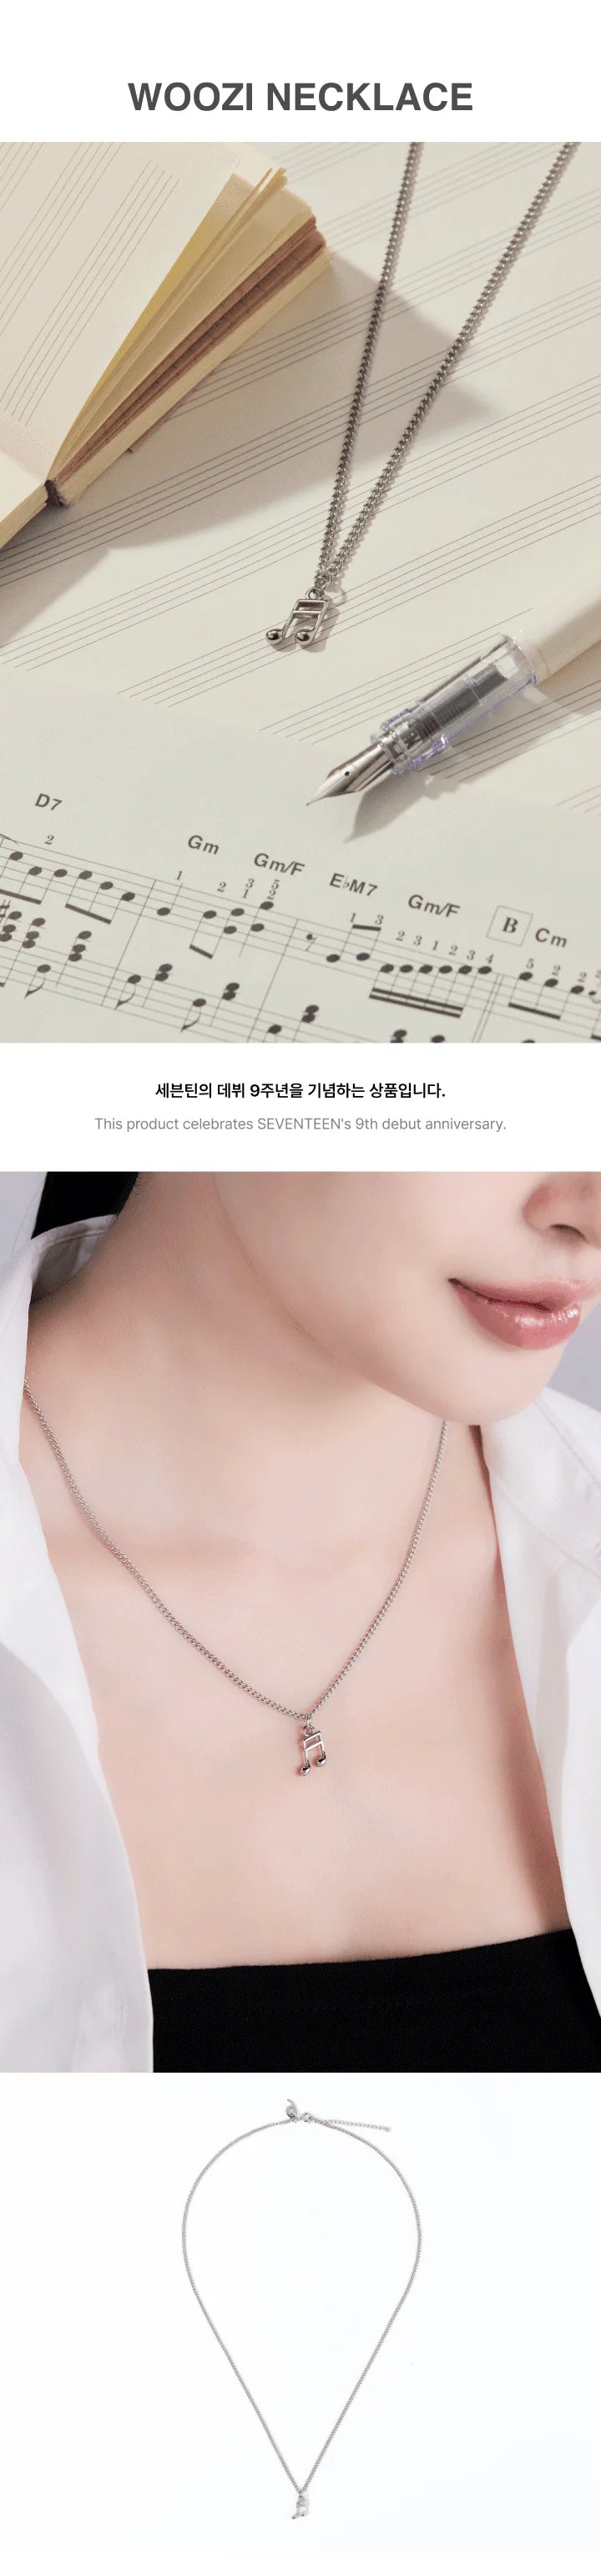 [PRE ORDER] SEVENTEEN - 9TH ANNIVERSARY (Official MD) / NECKLACE : WOOZI